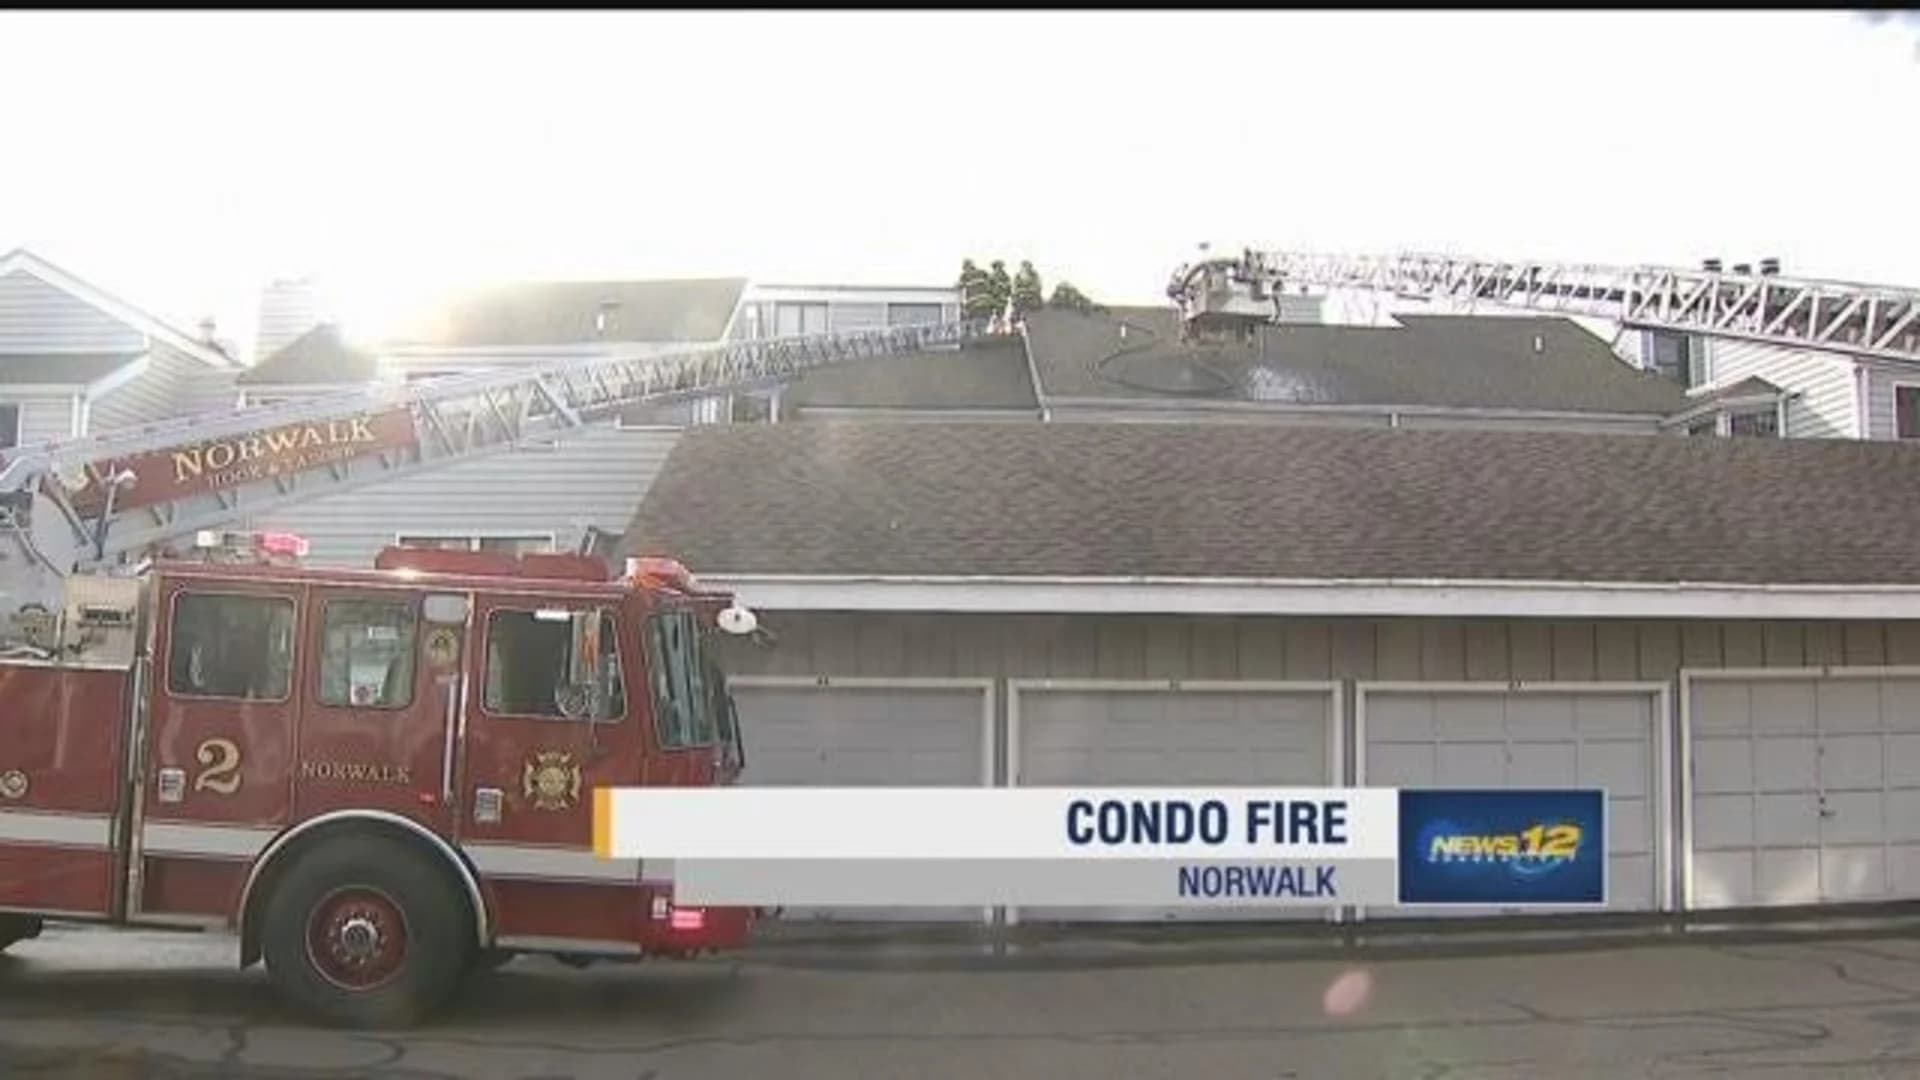 Man displaced after Norwalk condo fire